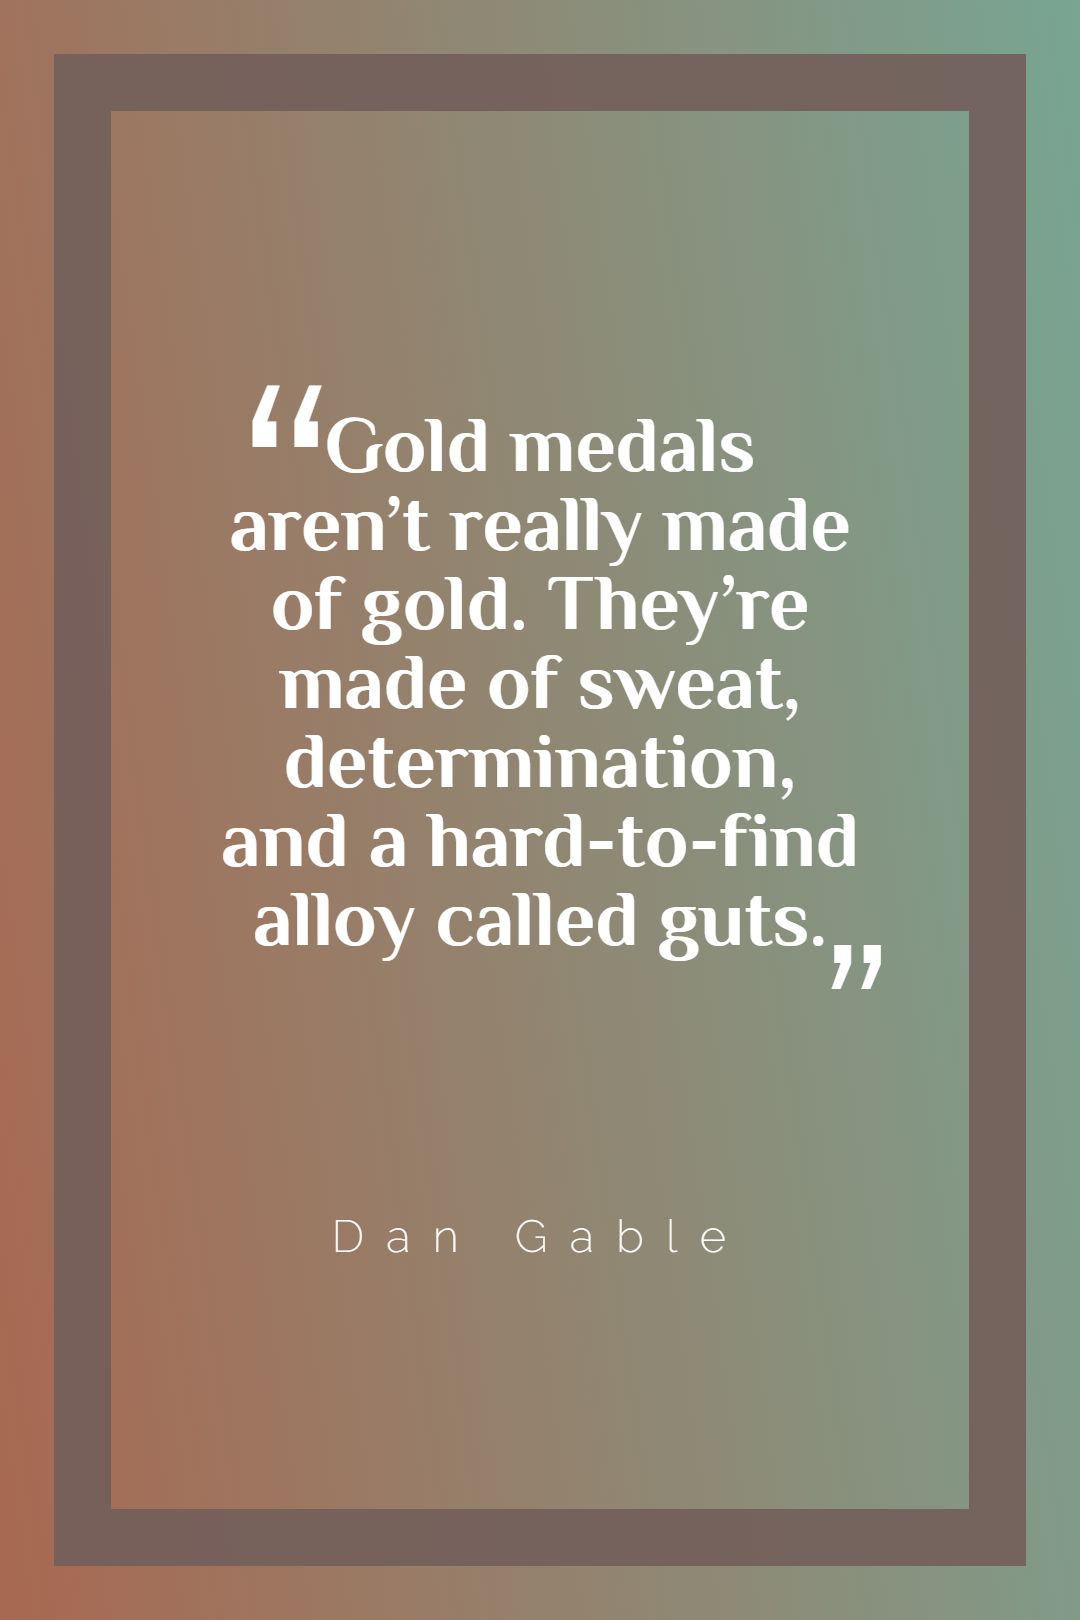 Gold medals aren’t really made of gold. They’re made of sweat determination and a hard to find alloy called guts.